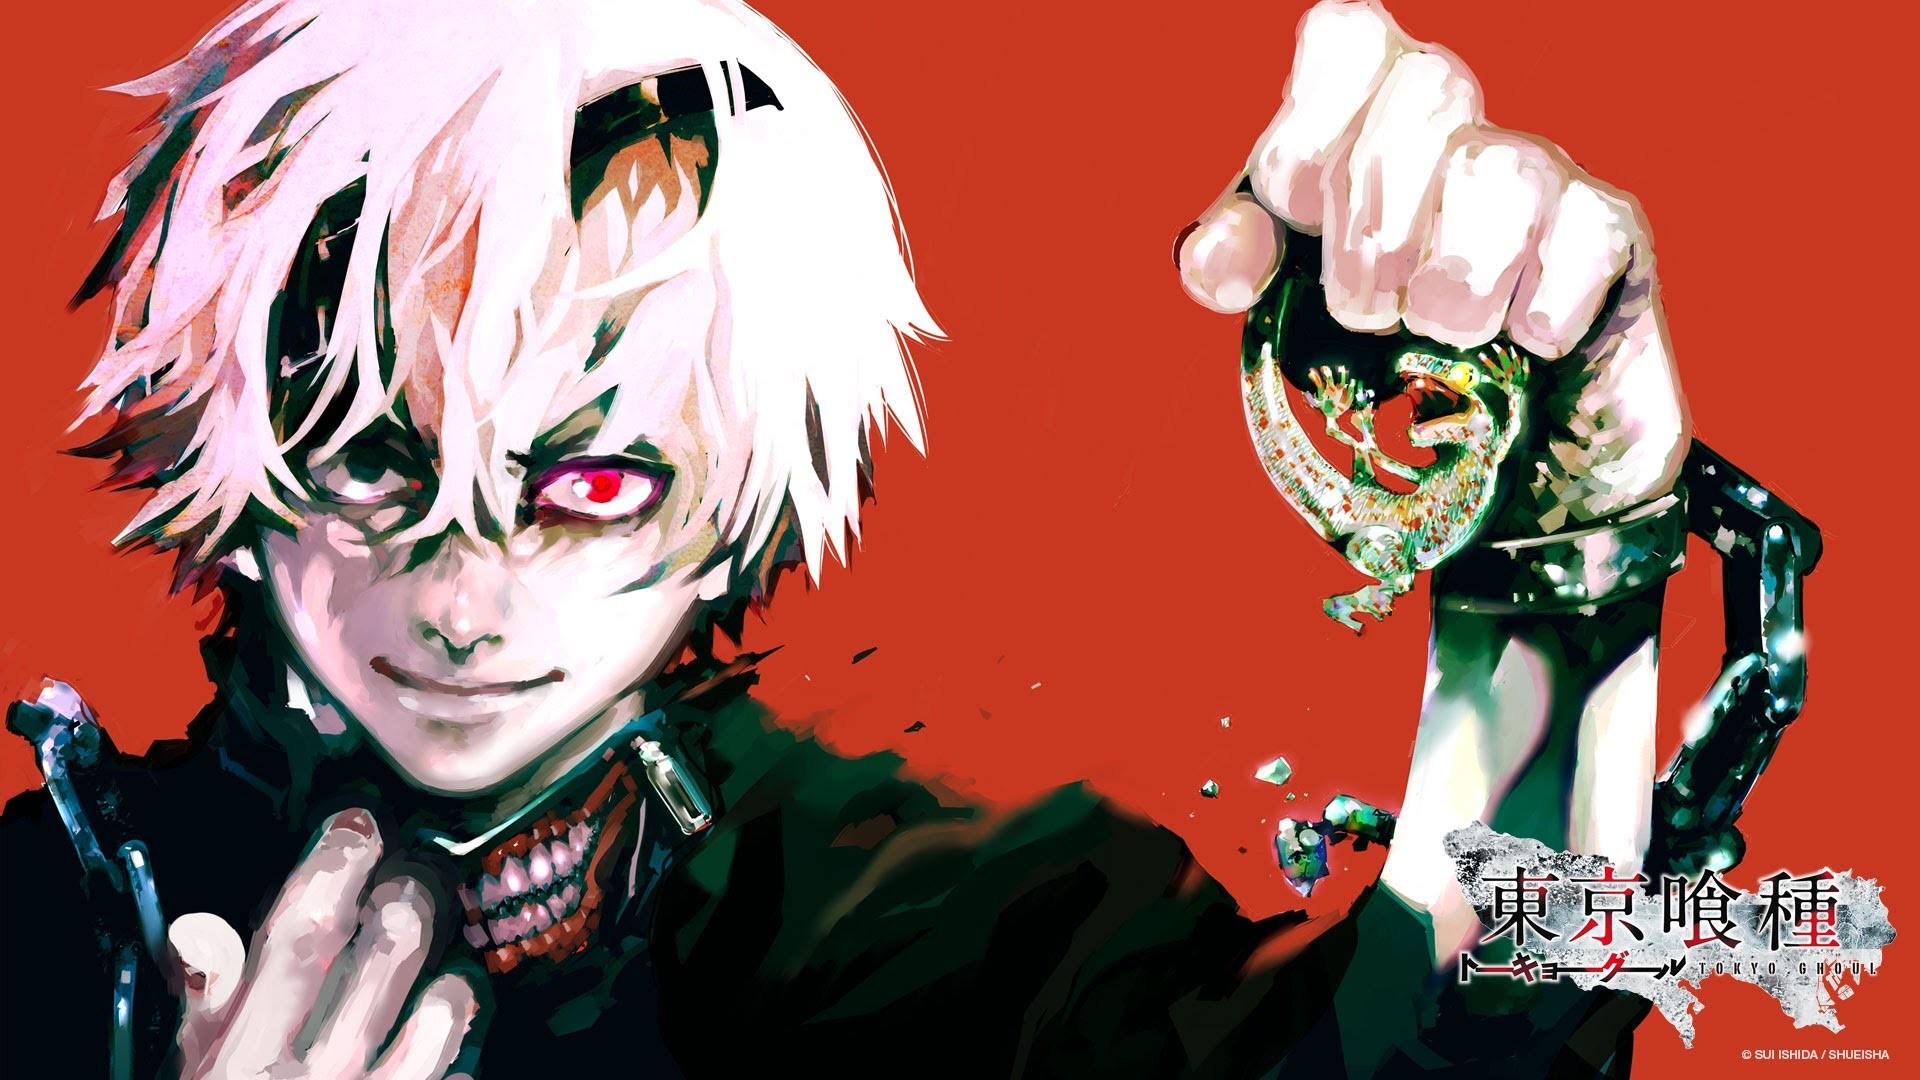 1920x1080 Tokyo Ghoul - [Amv] - Slipknot "The Devil In I" Dont u just LUV this song!  It fits Tokyo Ghoul!